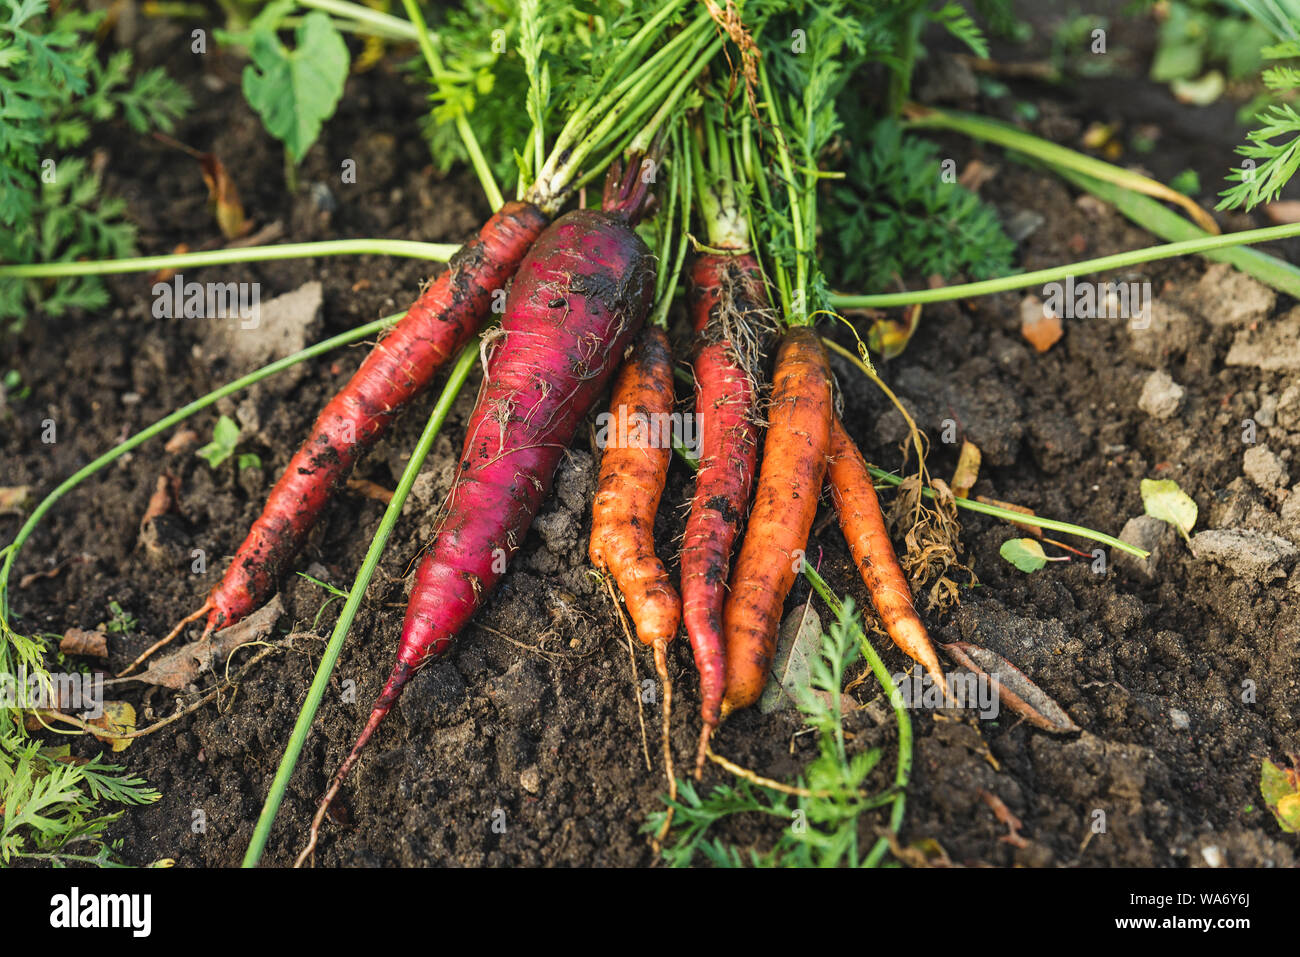 fresh harvested colorful carrots in the soil on the ground. farming agriculture concept. healthy organic food. close up Stock Photo